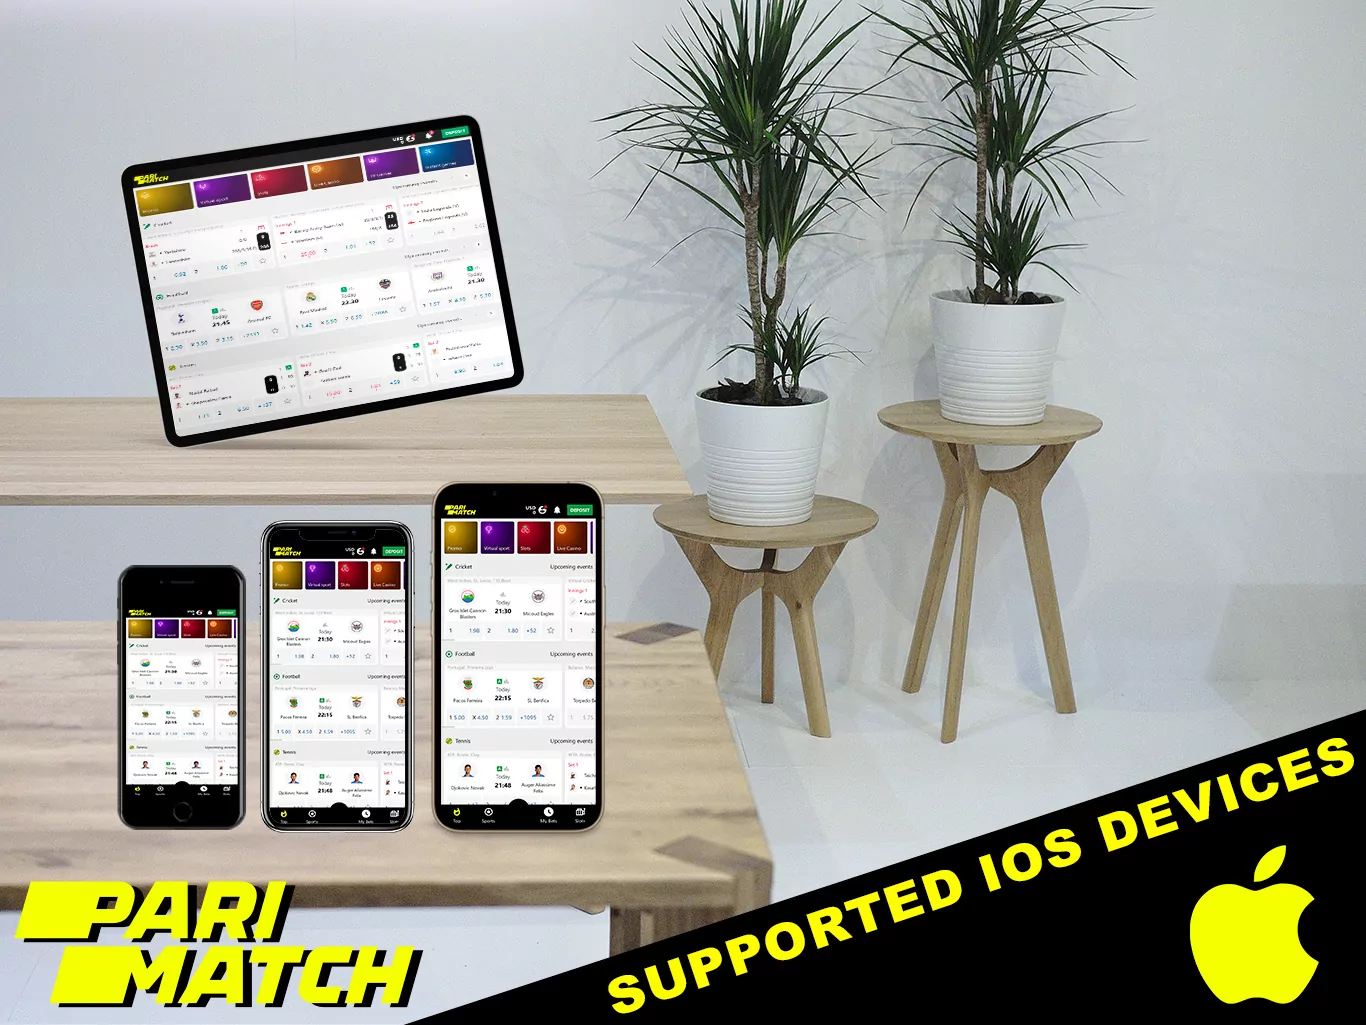 The Parimatch application is available not only on iPhones but also on Ipads, we present a list of gadgets on which our application is recommended to be used.